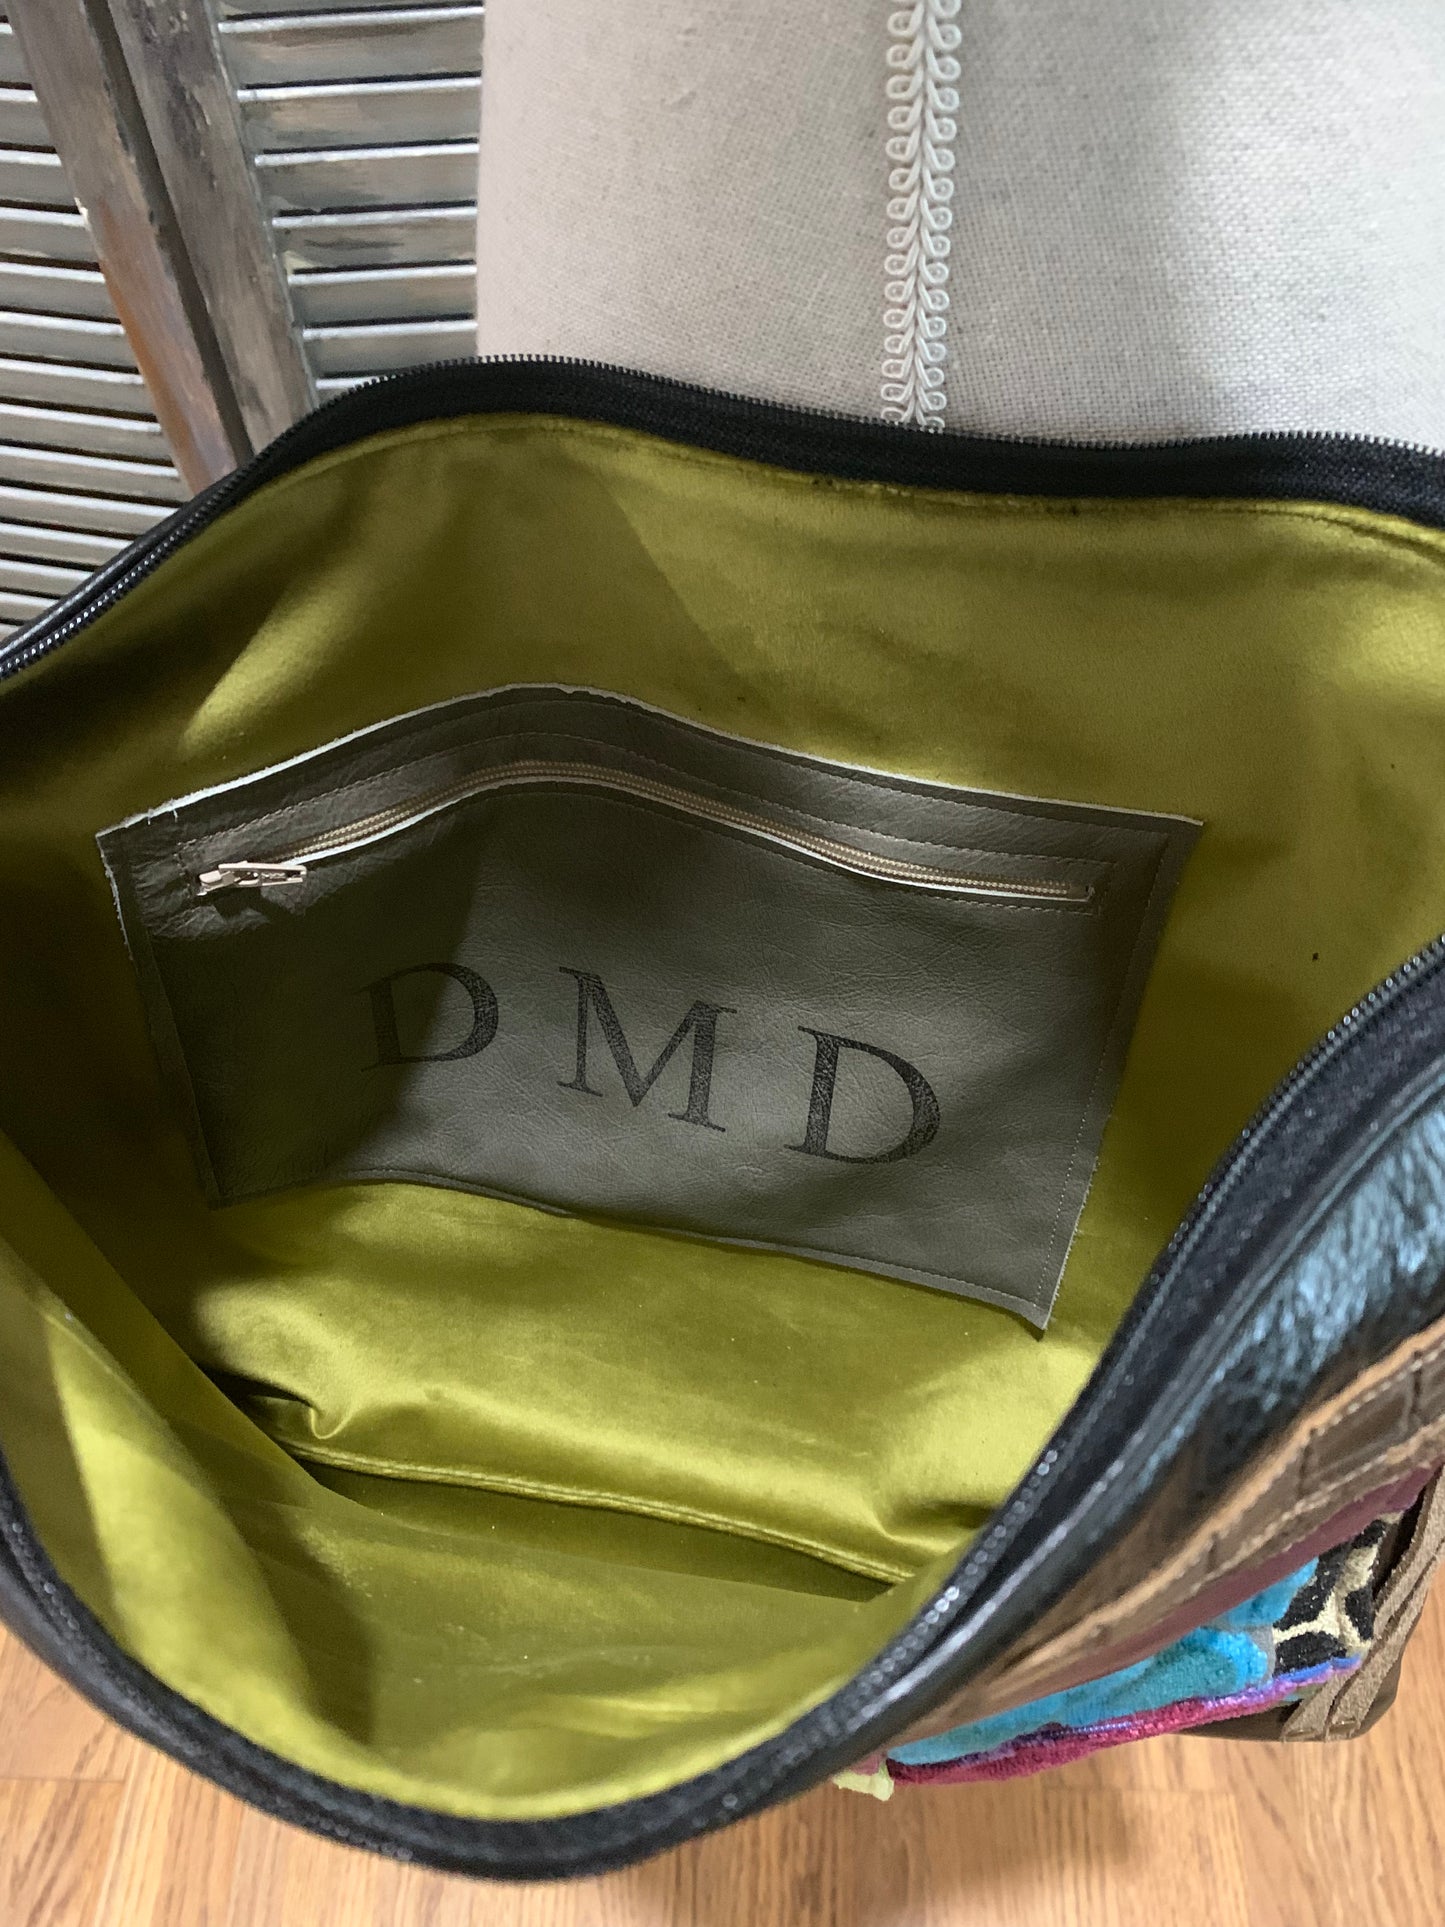 Black Leather Beauty! - DMD Bags